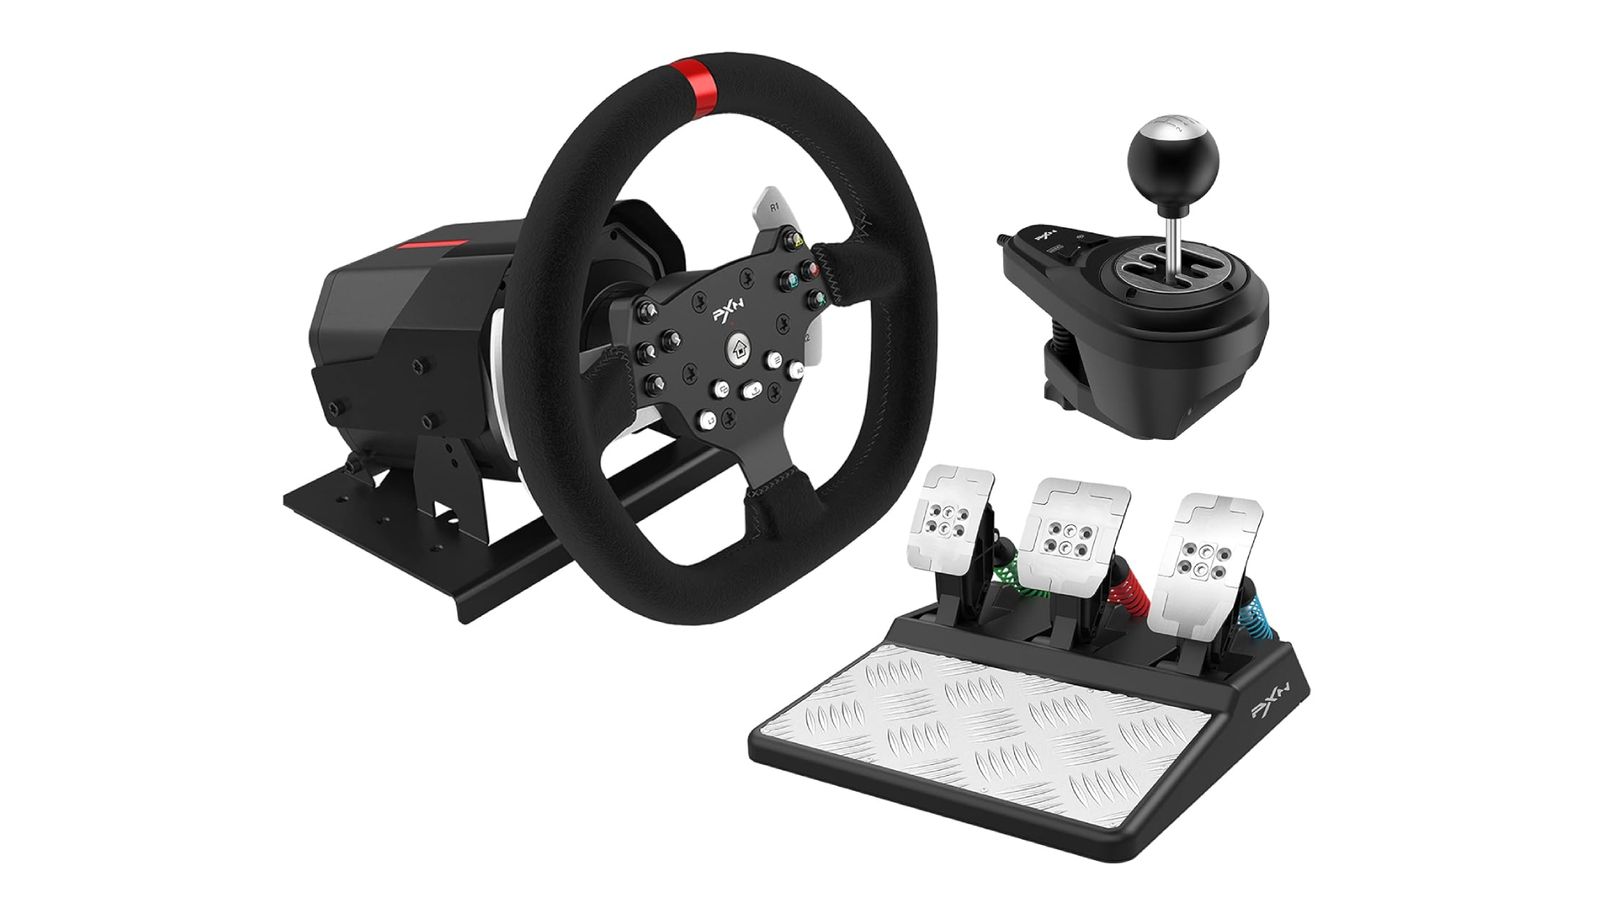 PXN V10 product image of a black racing wheel with a red centre line at the top next to a set of black and silver metal pedals and a gear shifter.